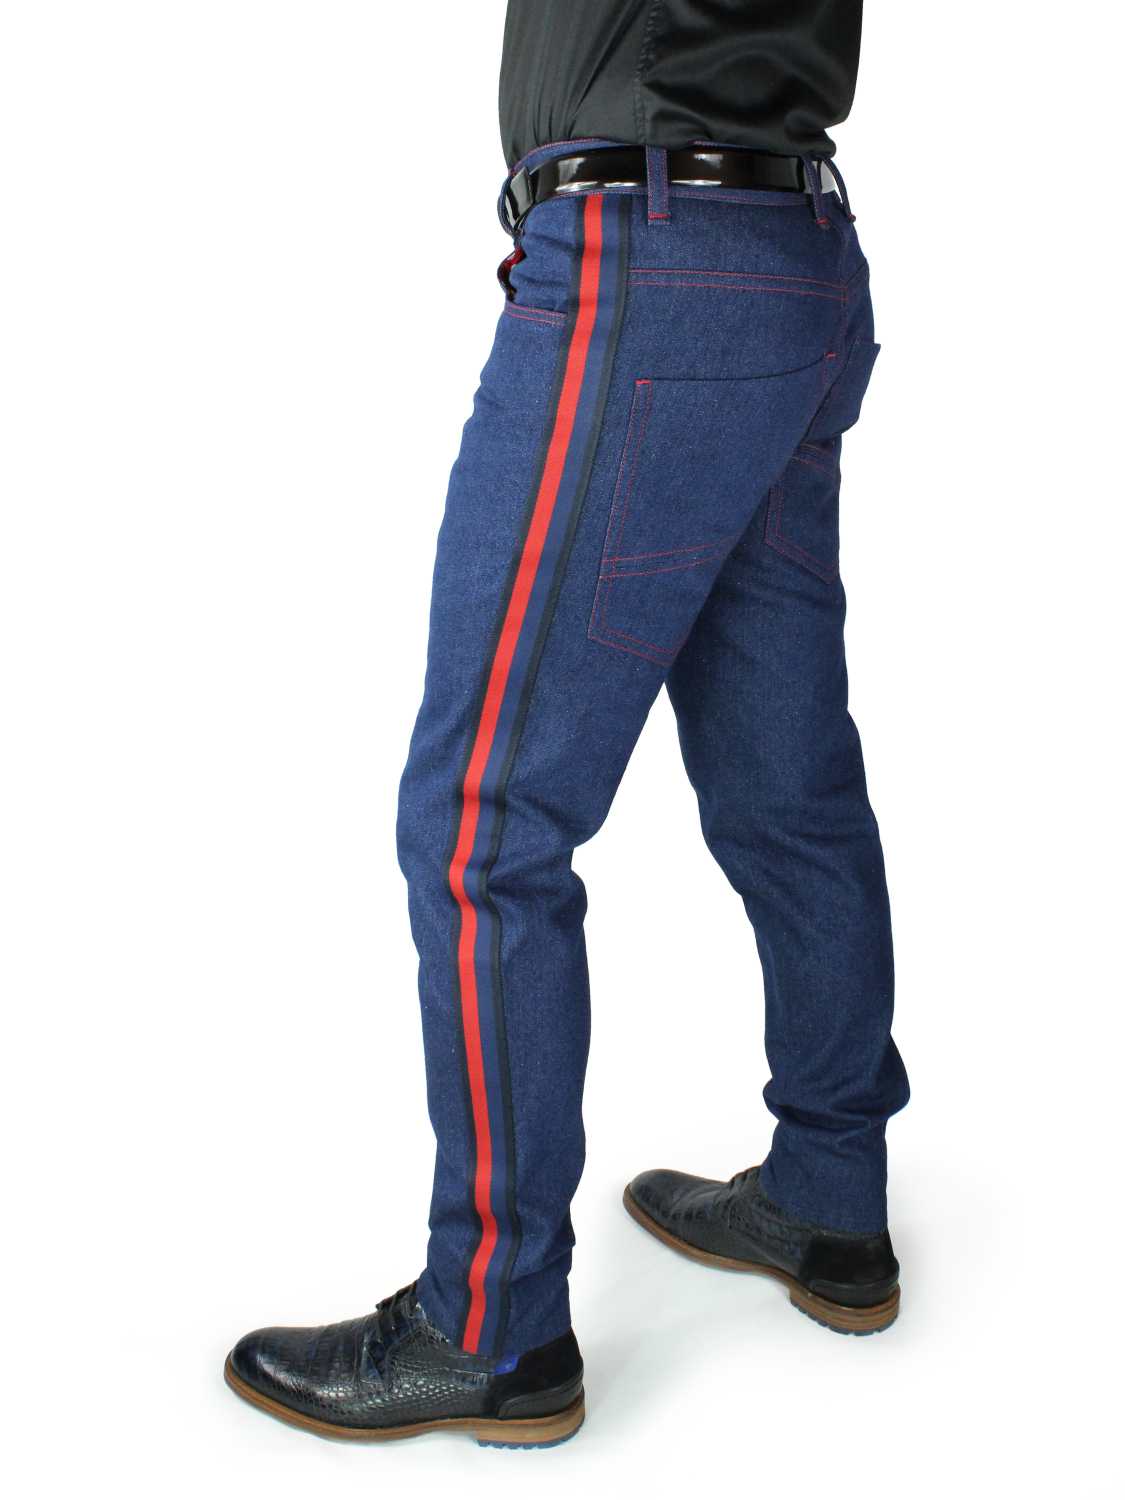 Jeans STEVEN with red-blue stripes along the side seams